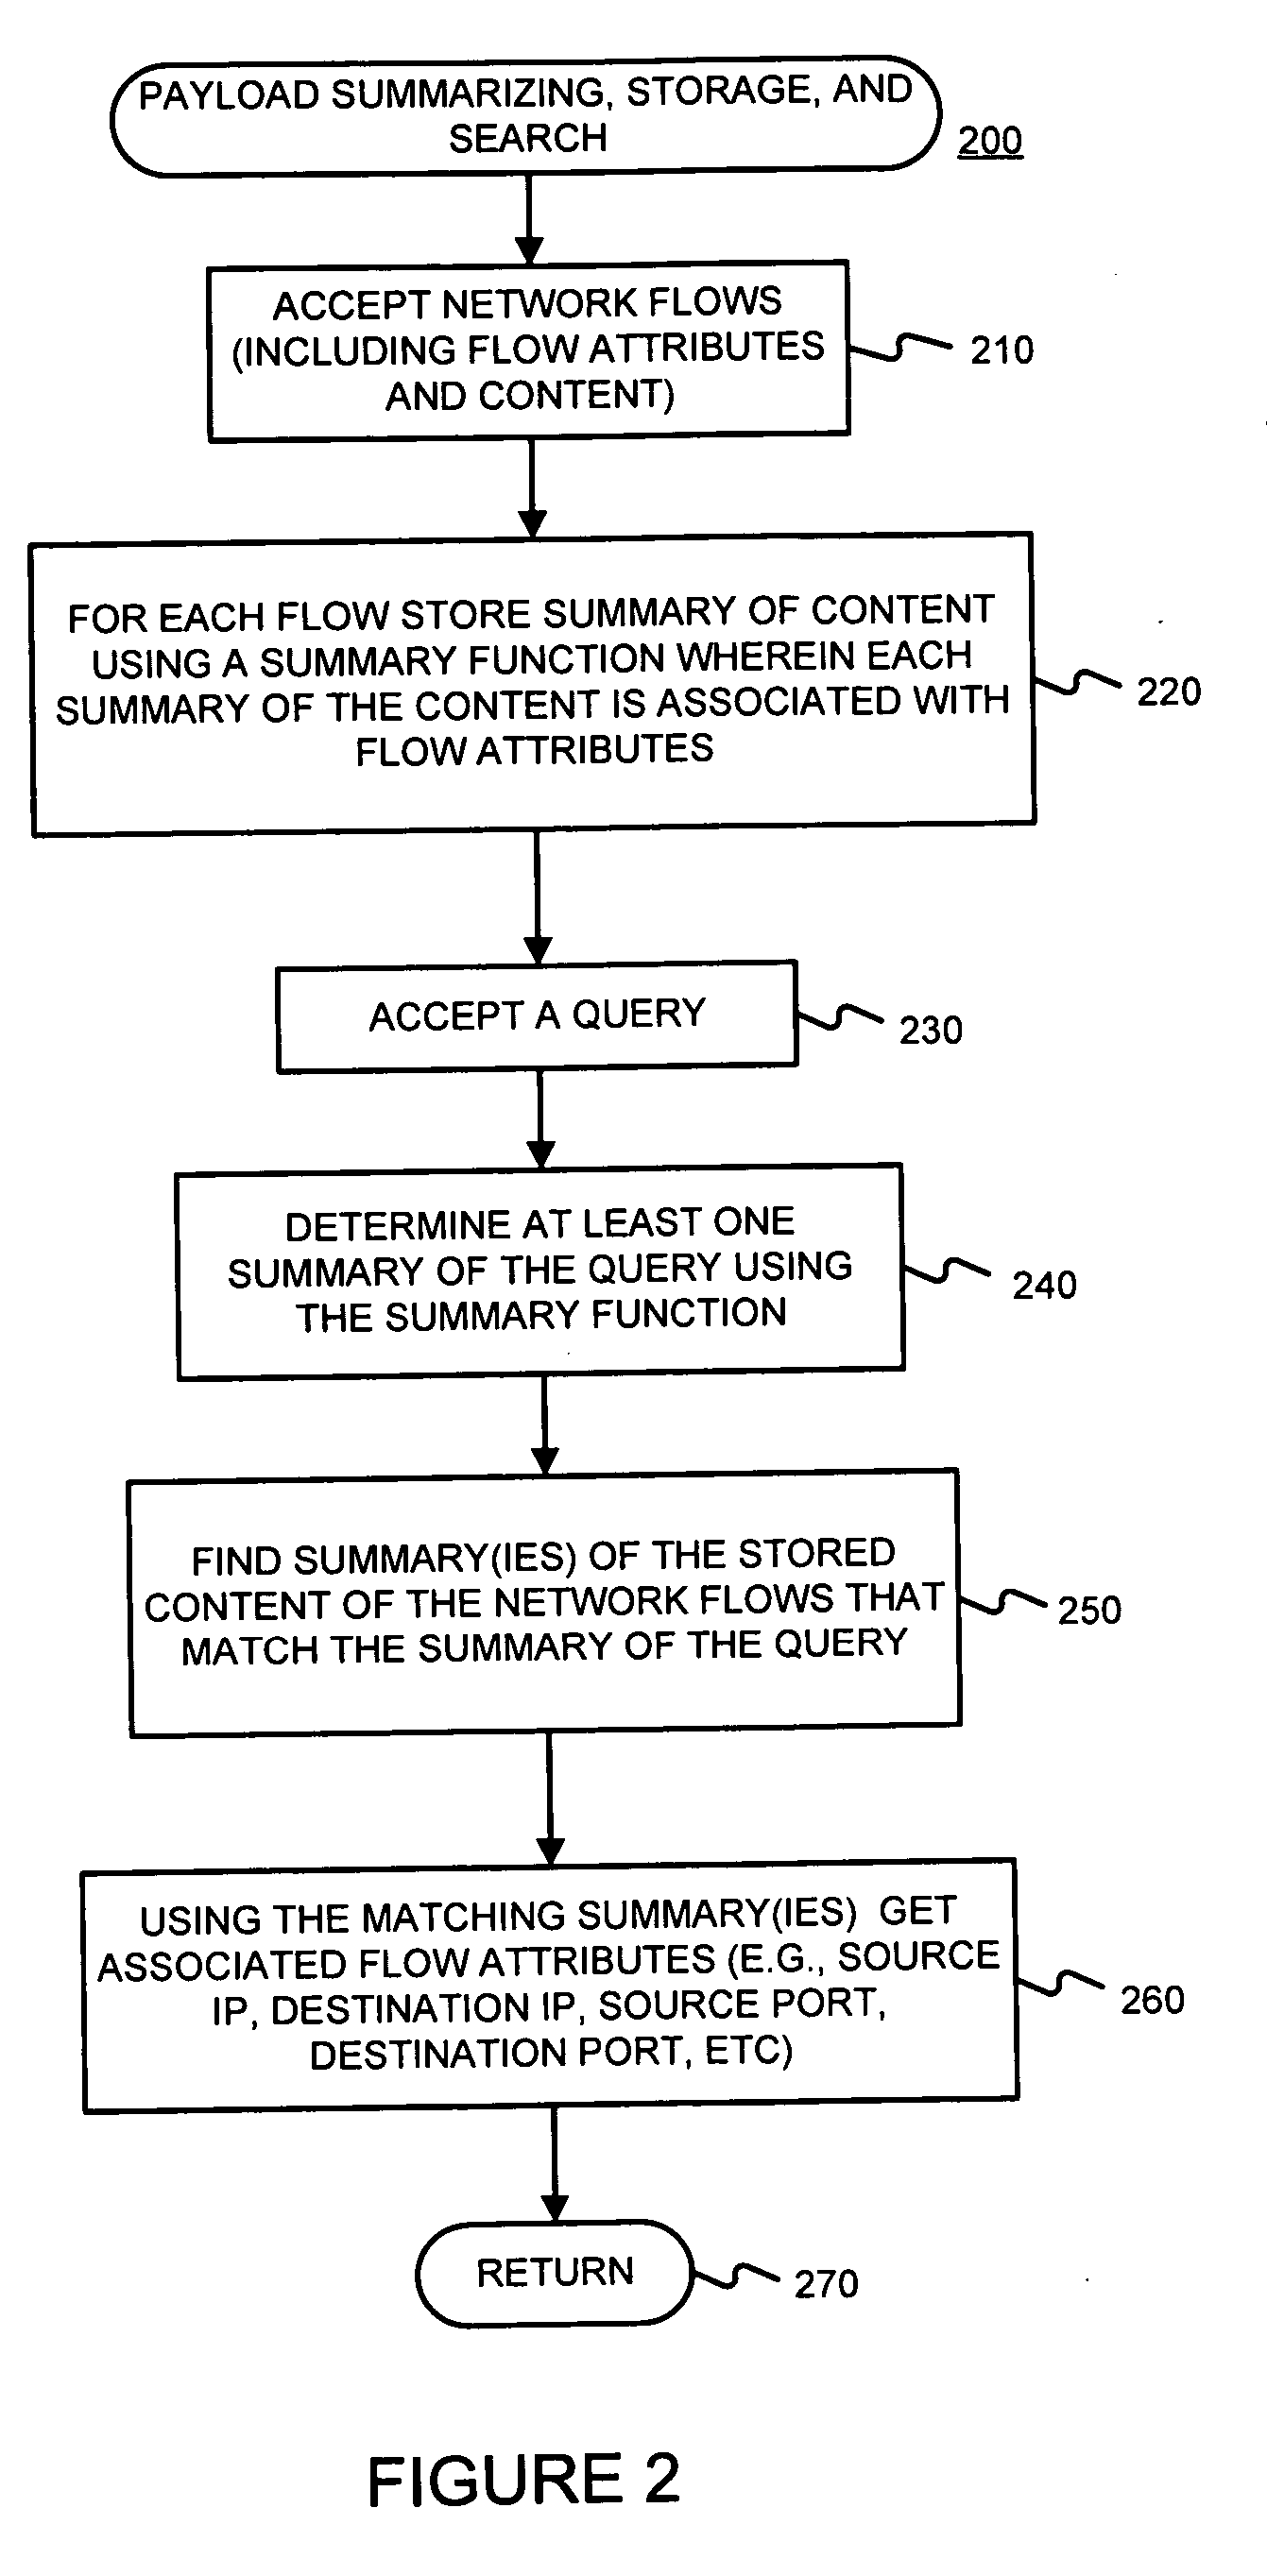 Facilitating storage and querying of payload attribution information